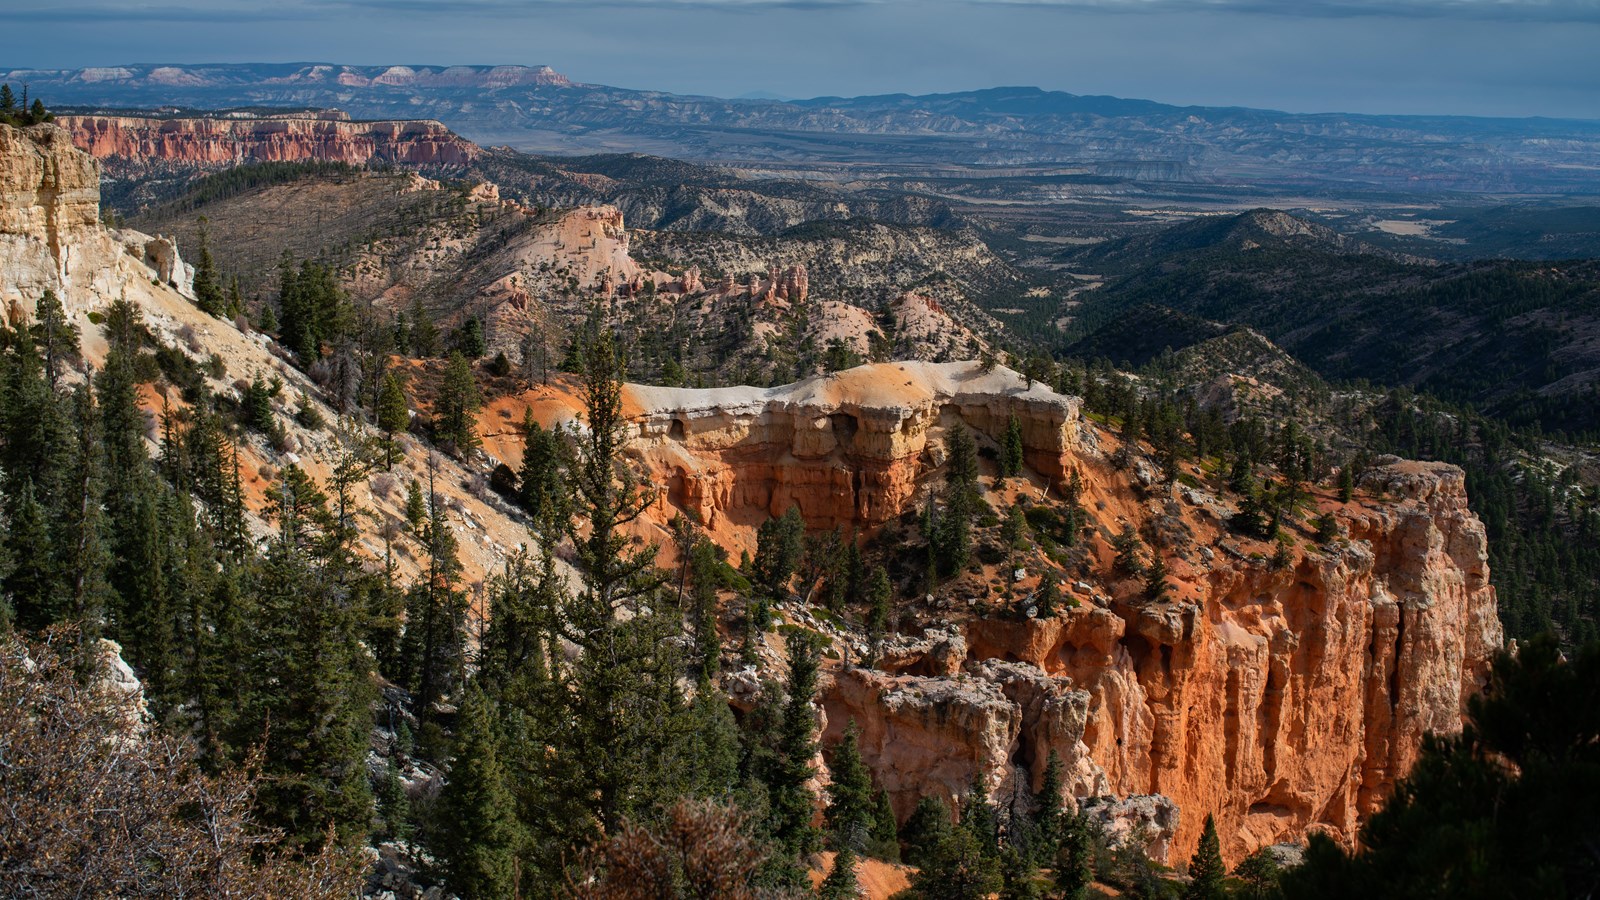 Vibrant red rock cliffs stand above forests with a distant plateau along the horizon